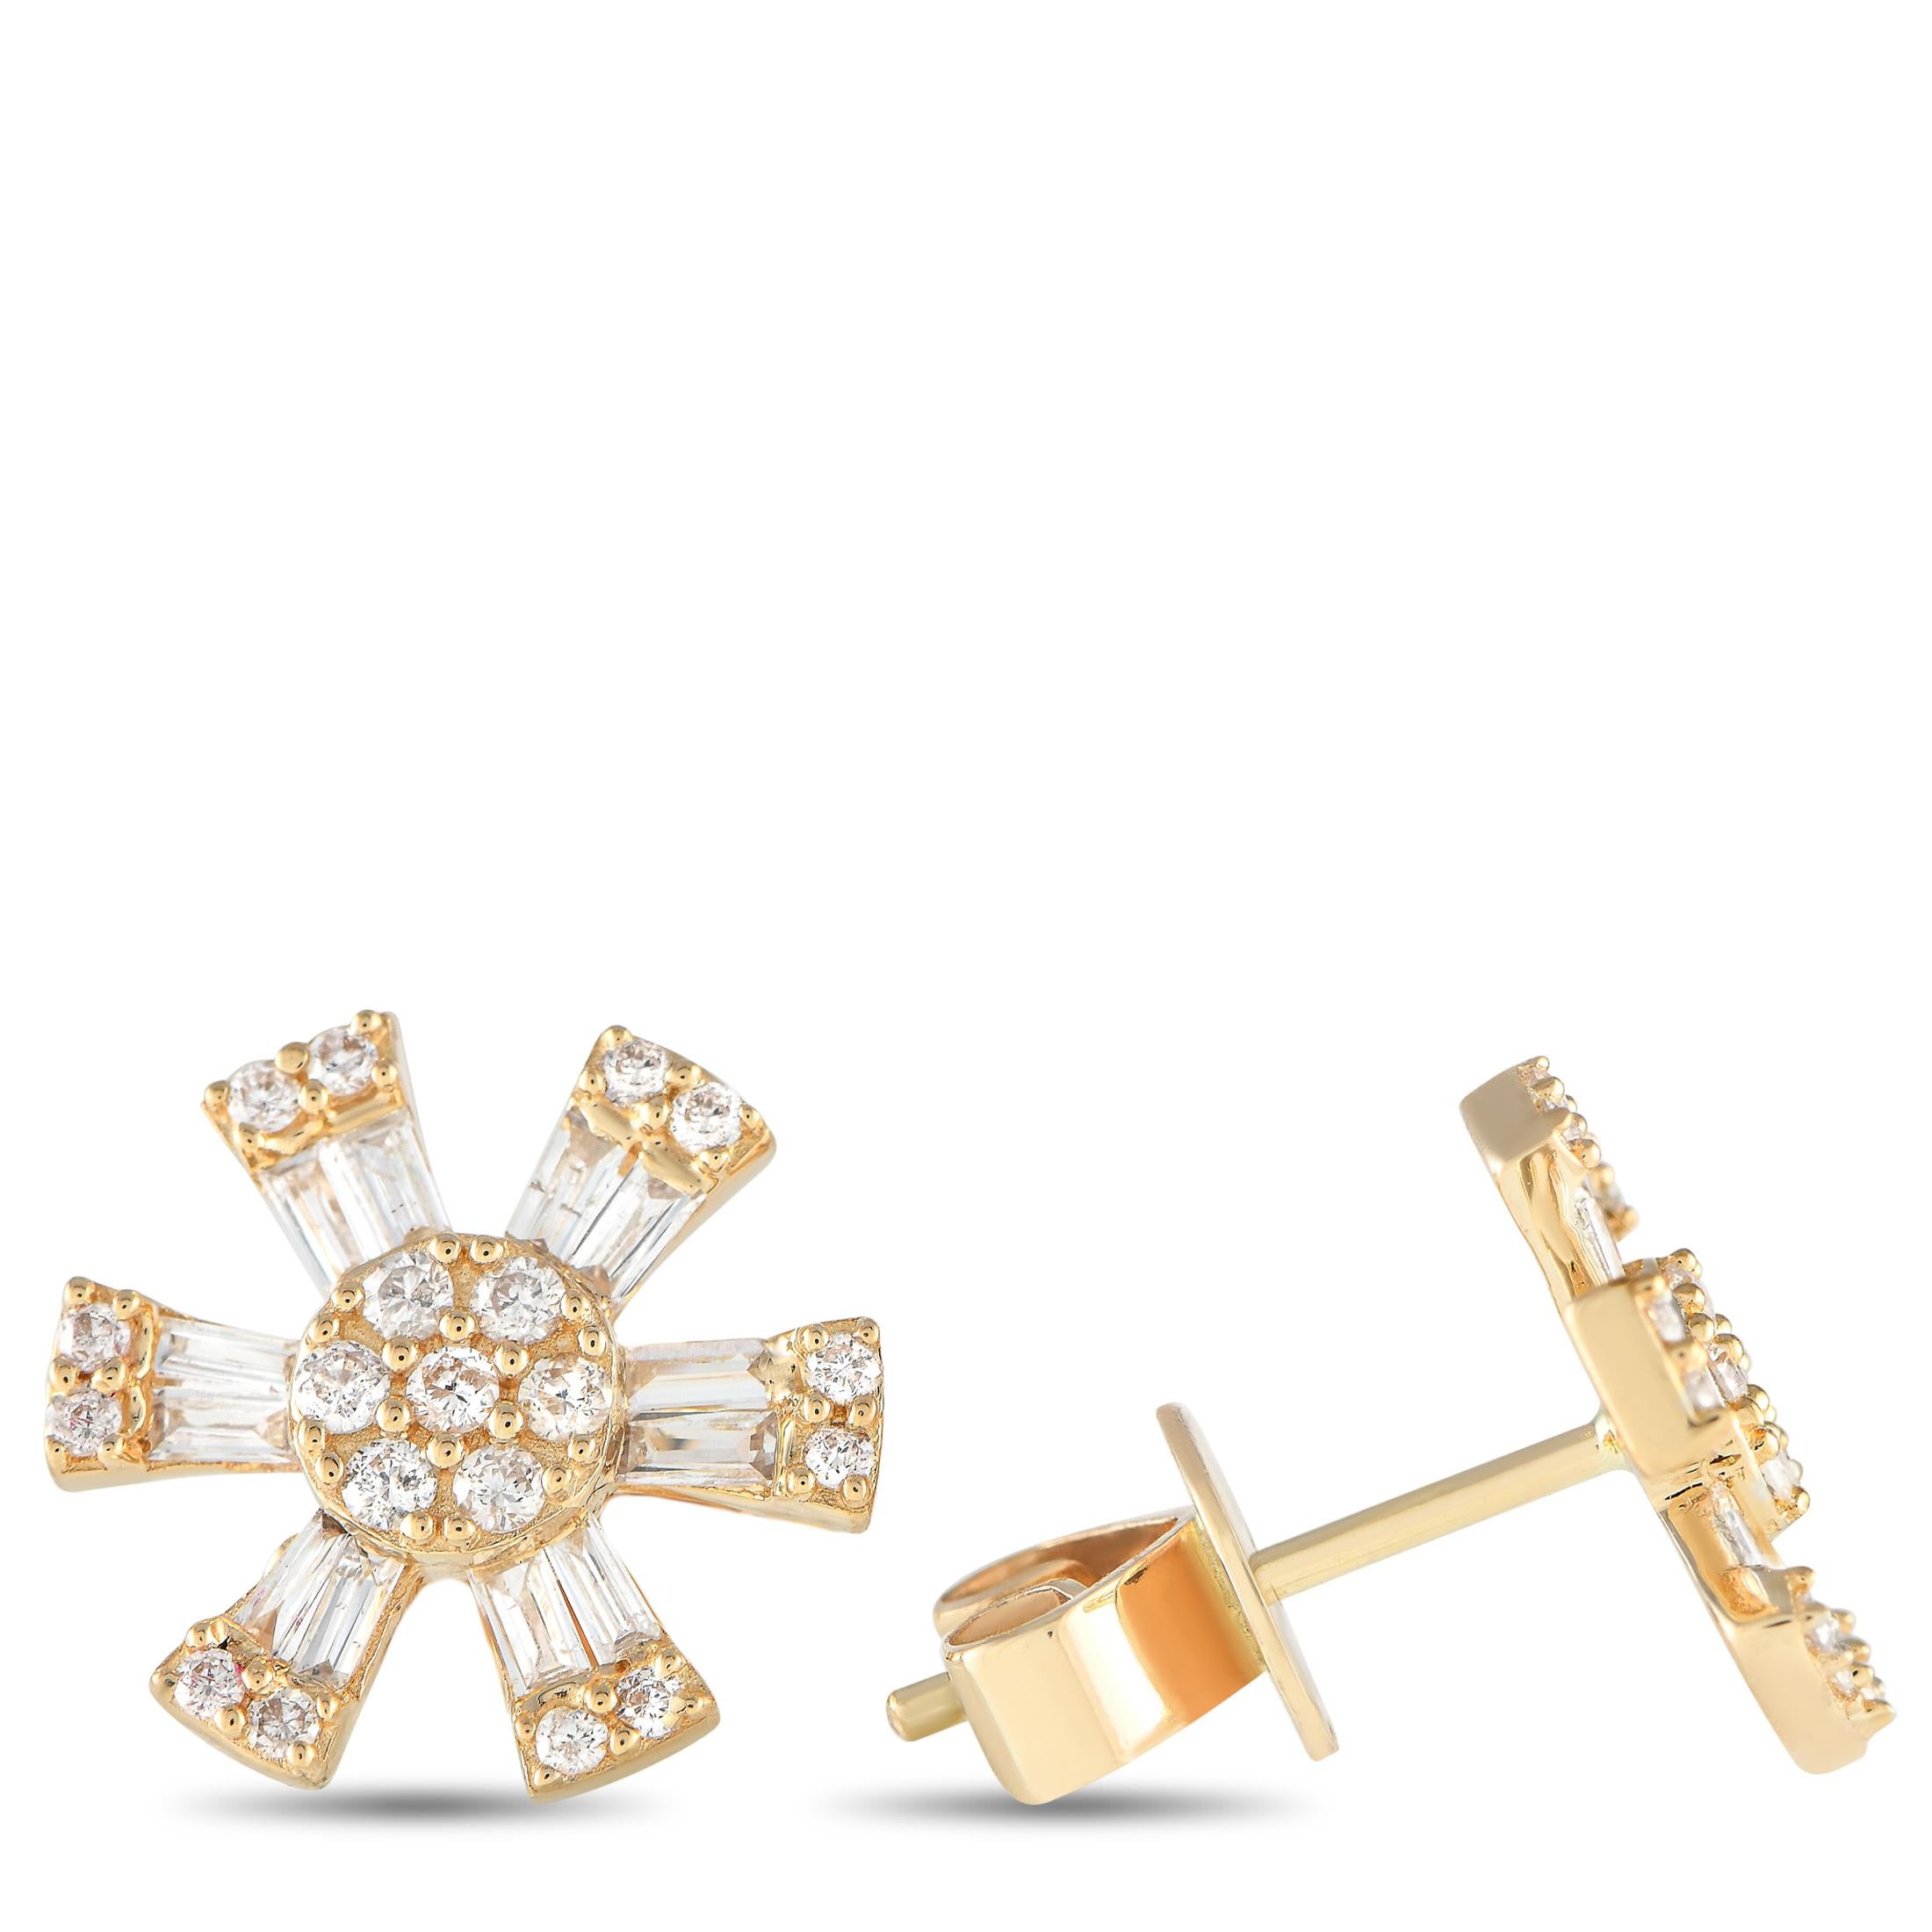 Let these studs polish a basic outfit with charming sparkle. The earrings feature a yellow-gold central disc adorned with a cluster of round diamonds. Surrounding it are step-cut diamond 